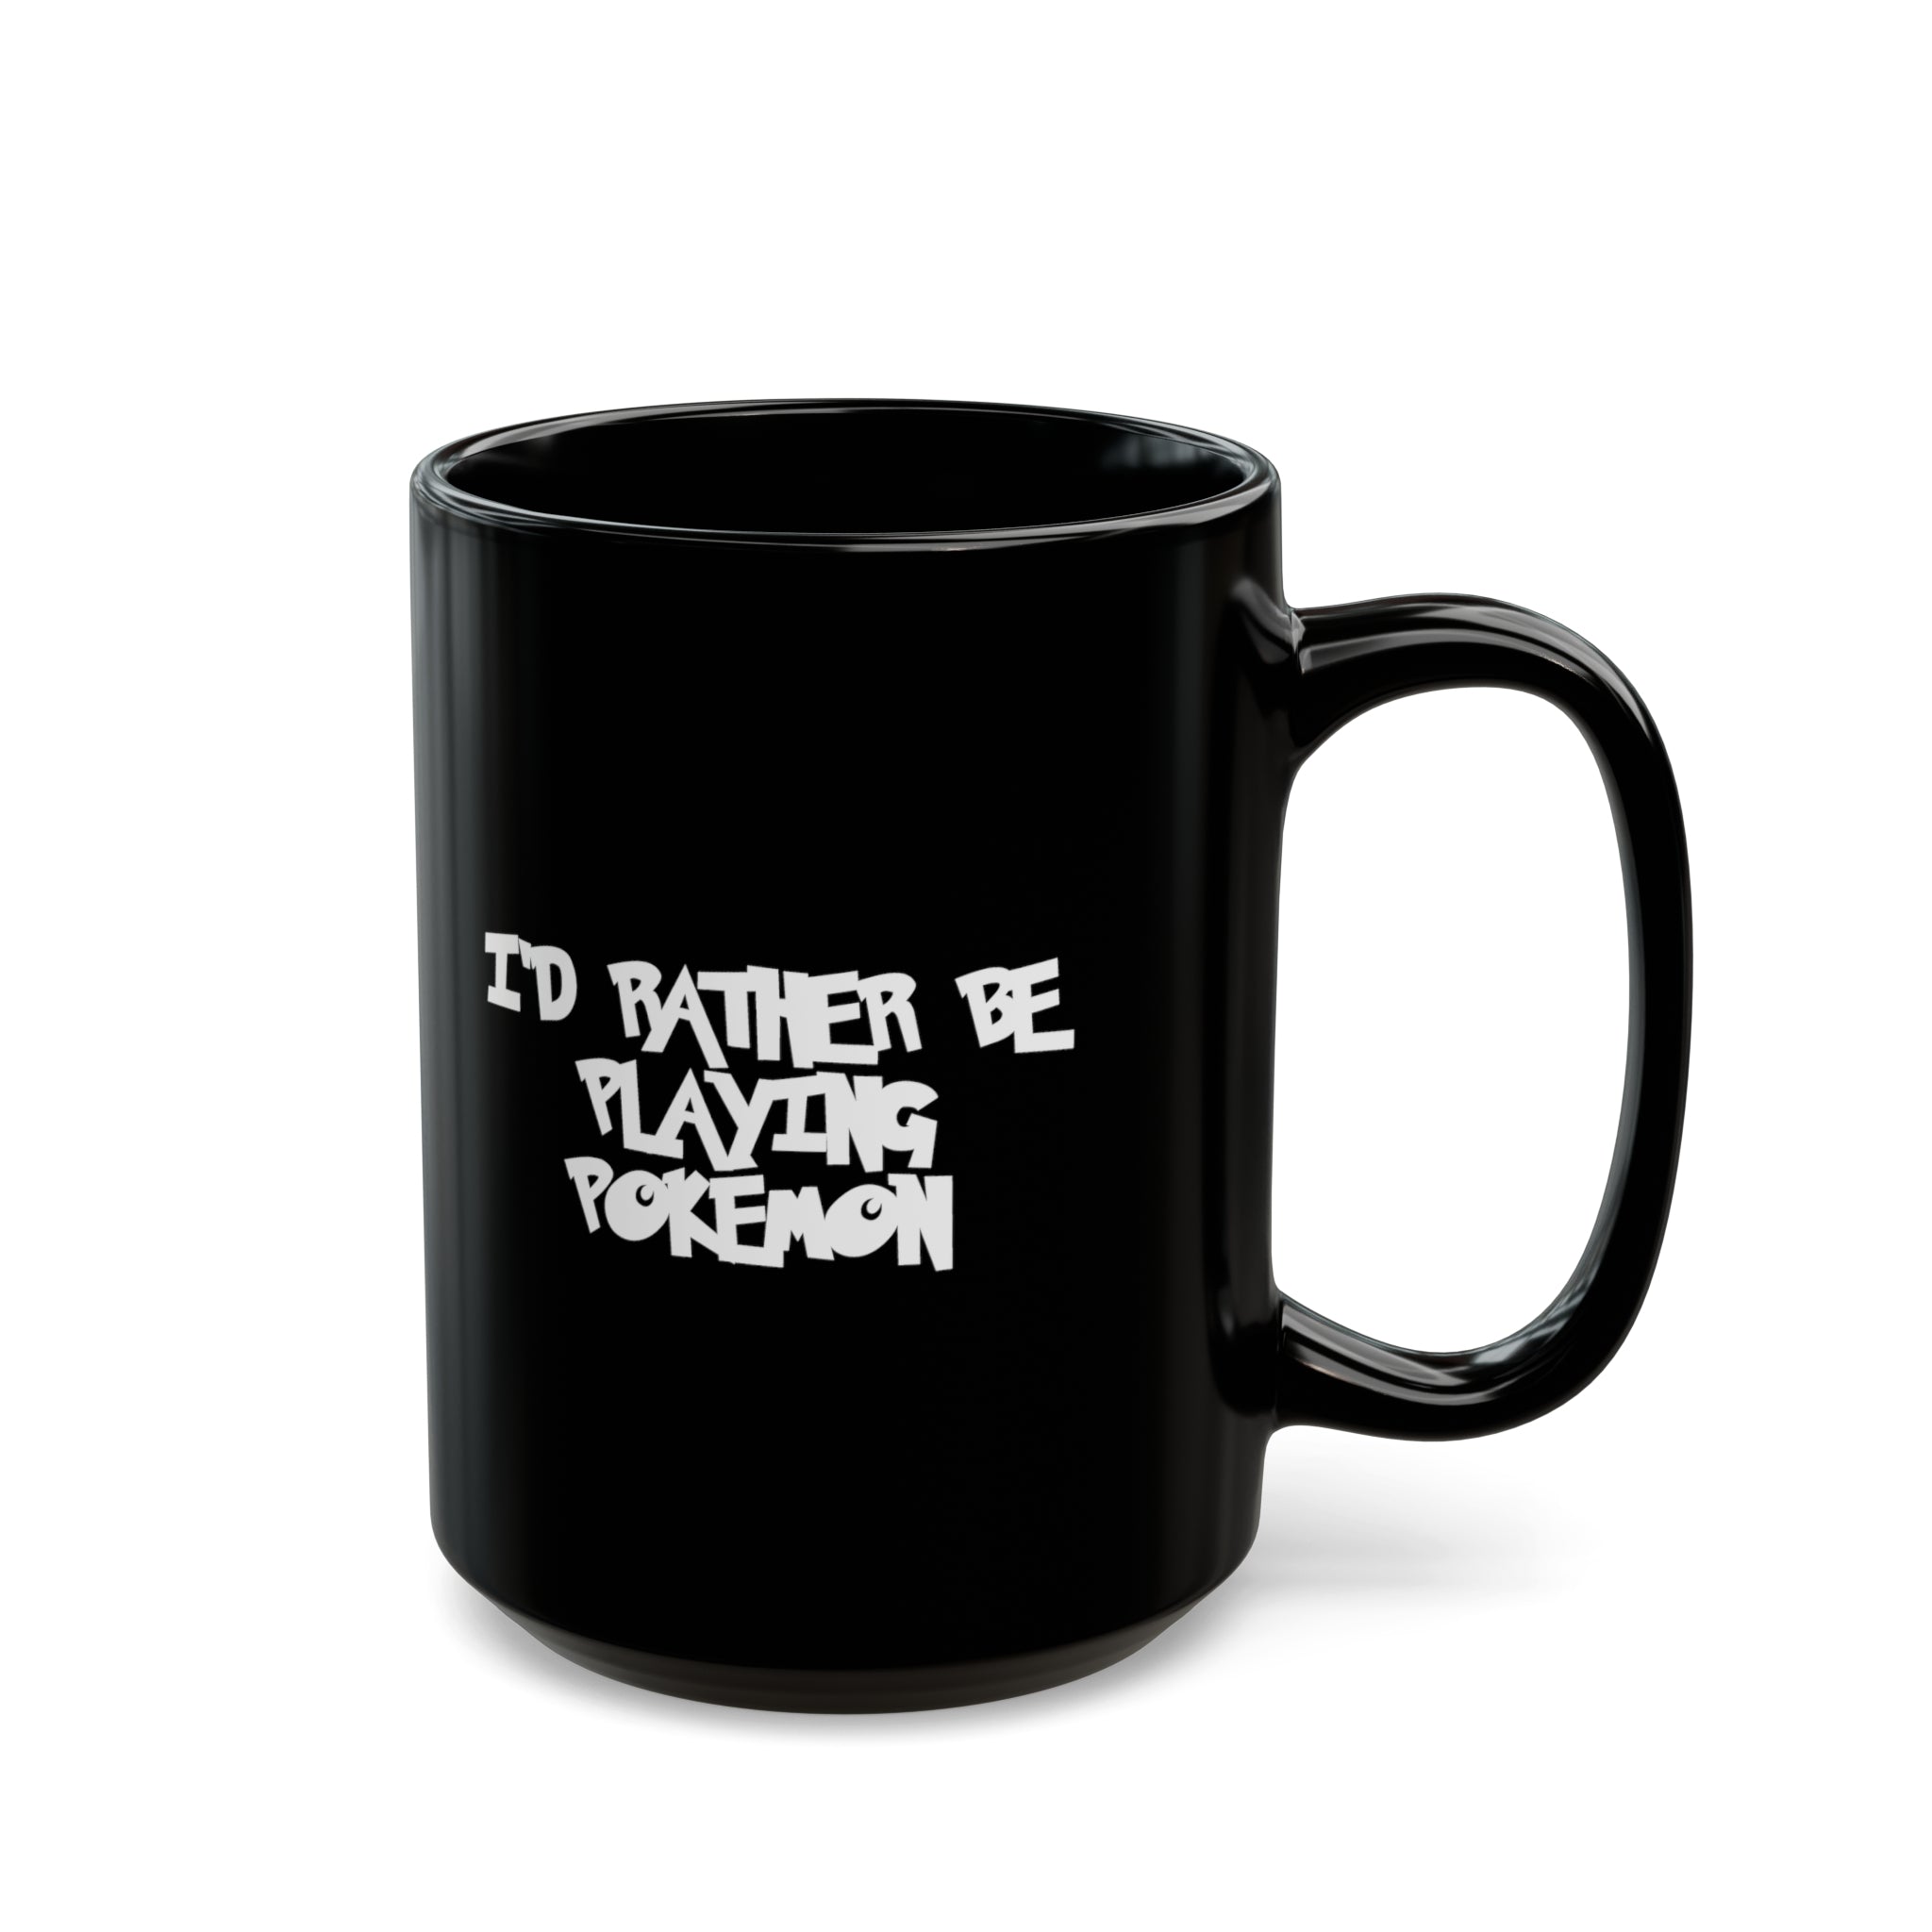 Poke mon I'd Rather Be Playing Black Mug (11oz, 15oz) Mugs Cups Gamer Gift For Him Her Game Cup Cups Mugs Birthday Christmas Valentine's Anniversary Gifts